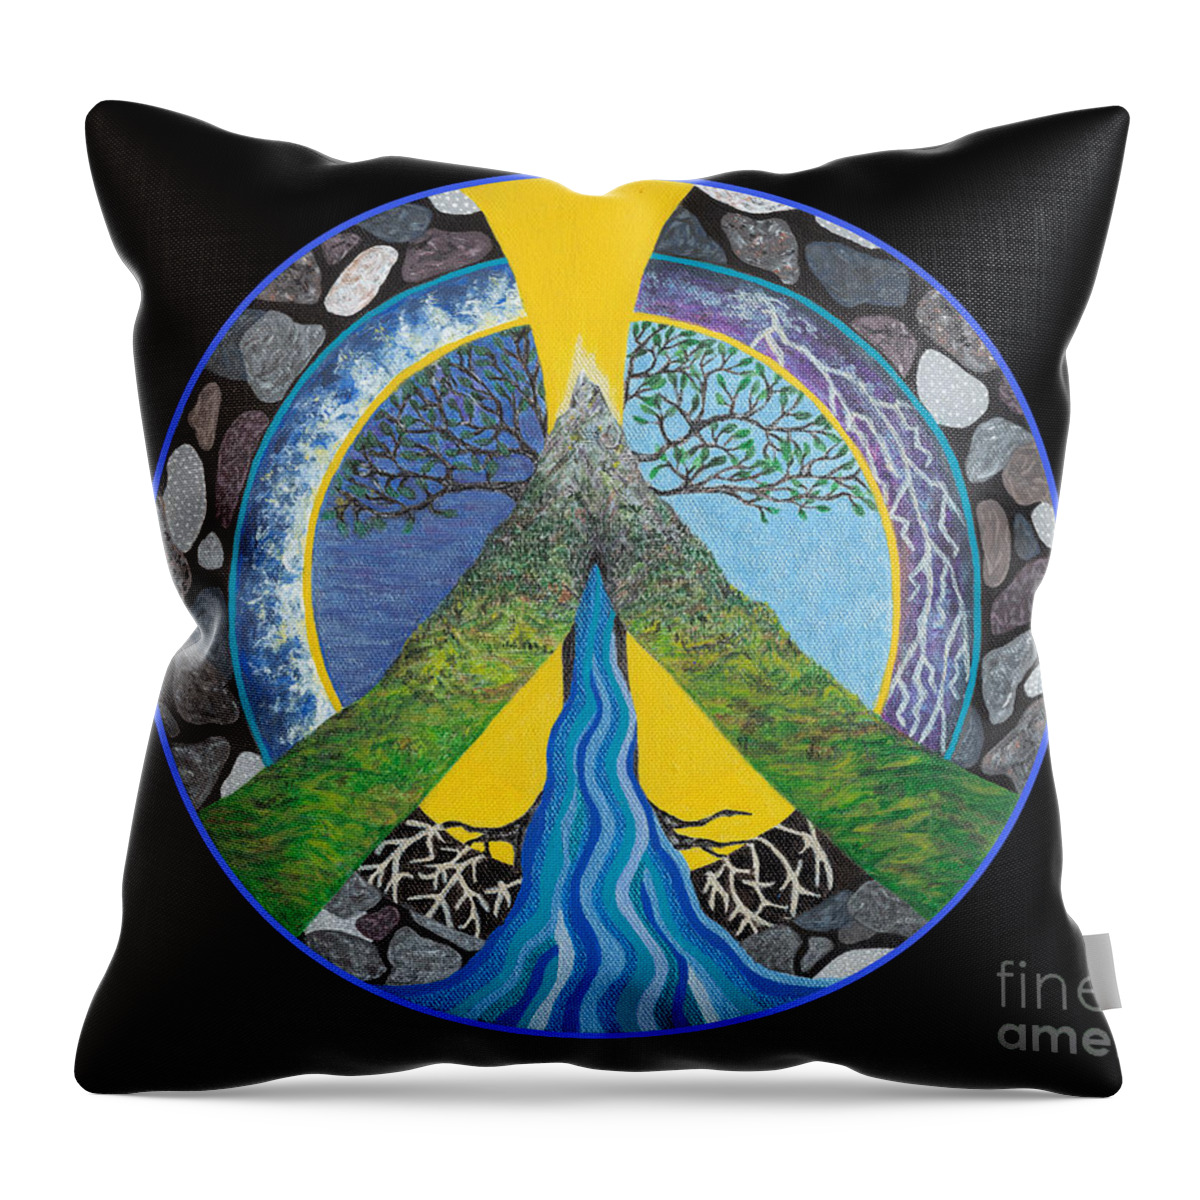 Peace Throw Pillow featuring the painting Peace Portal by Tree Whisper Art - DLynneS